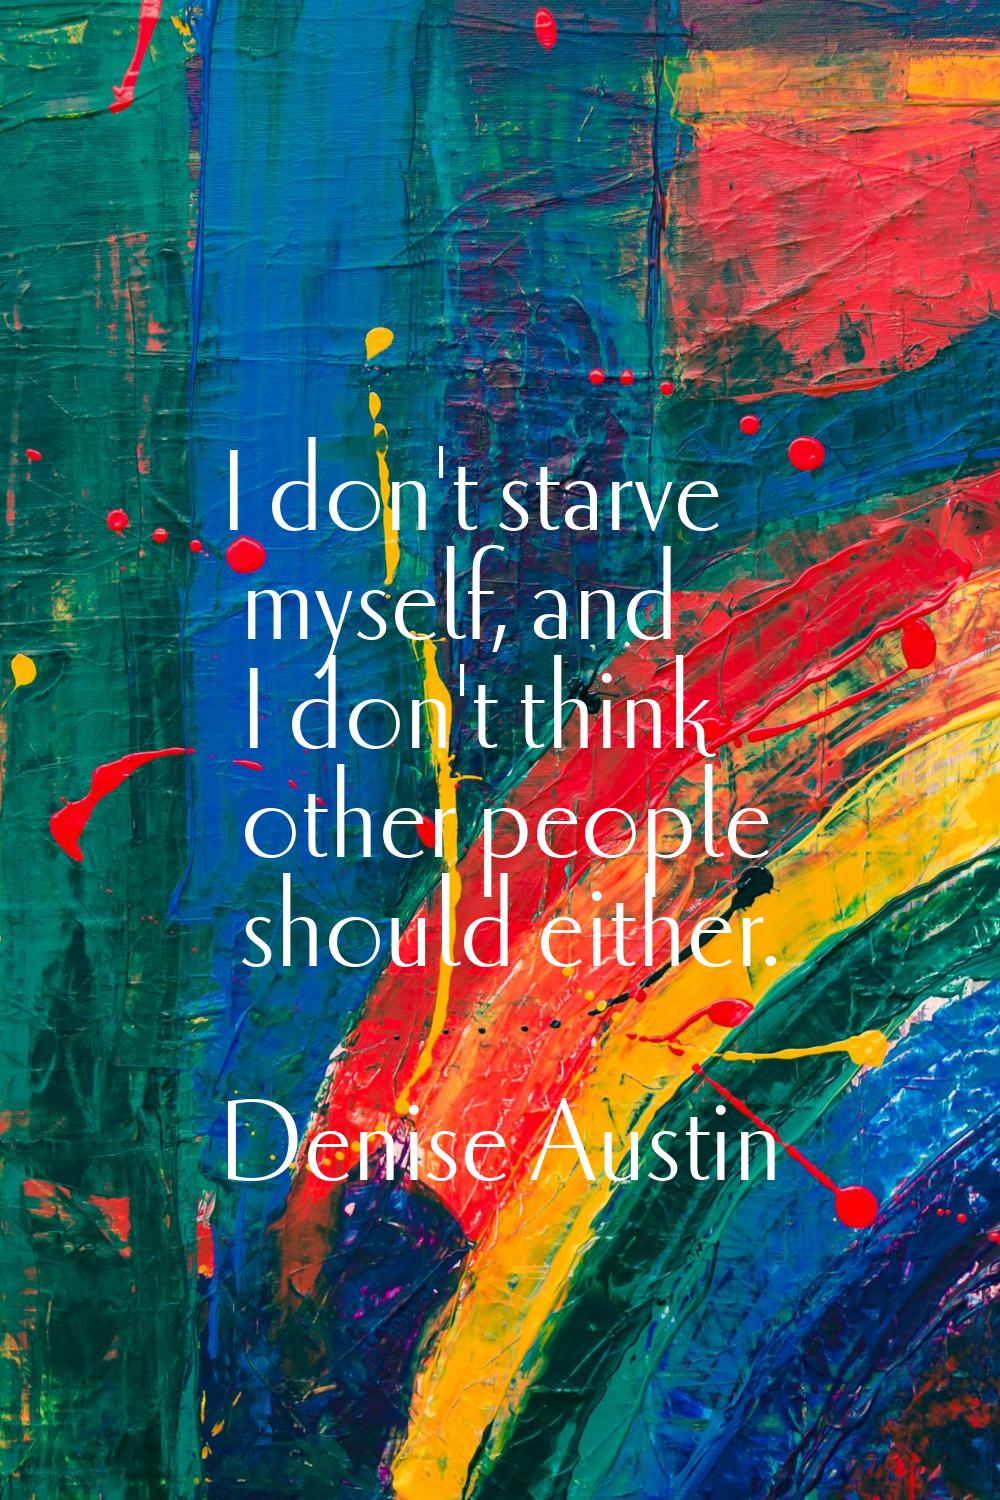 I don't starve myself, and I don't think other people should either.